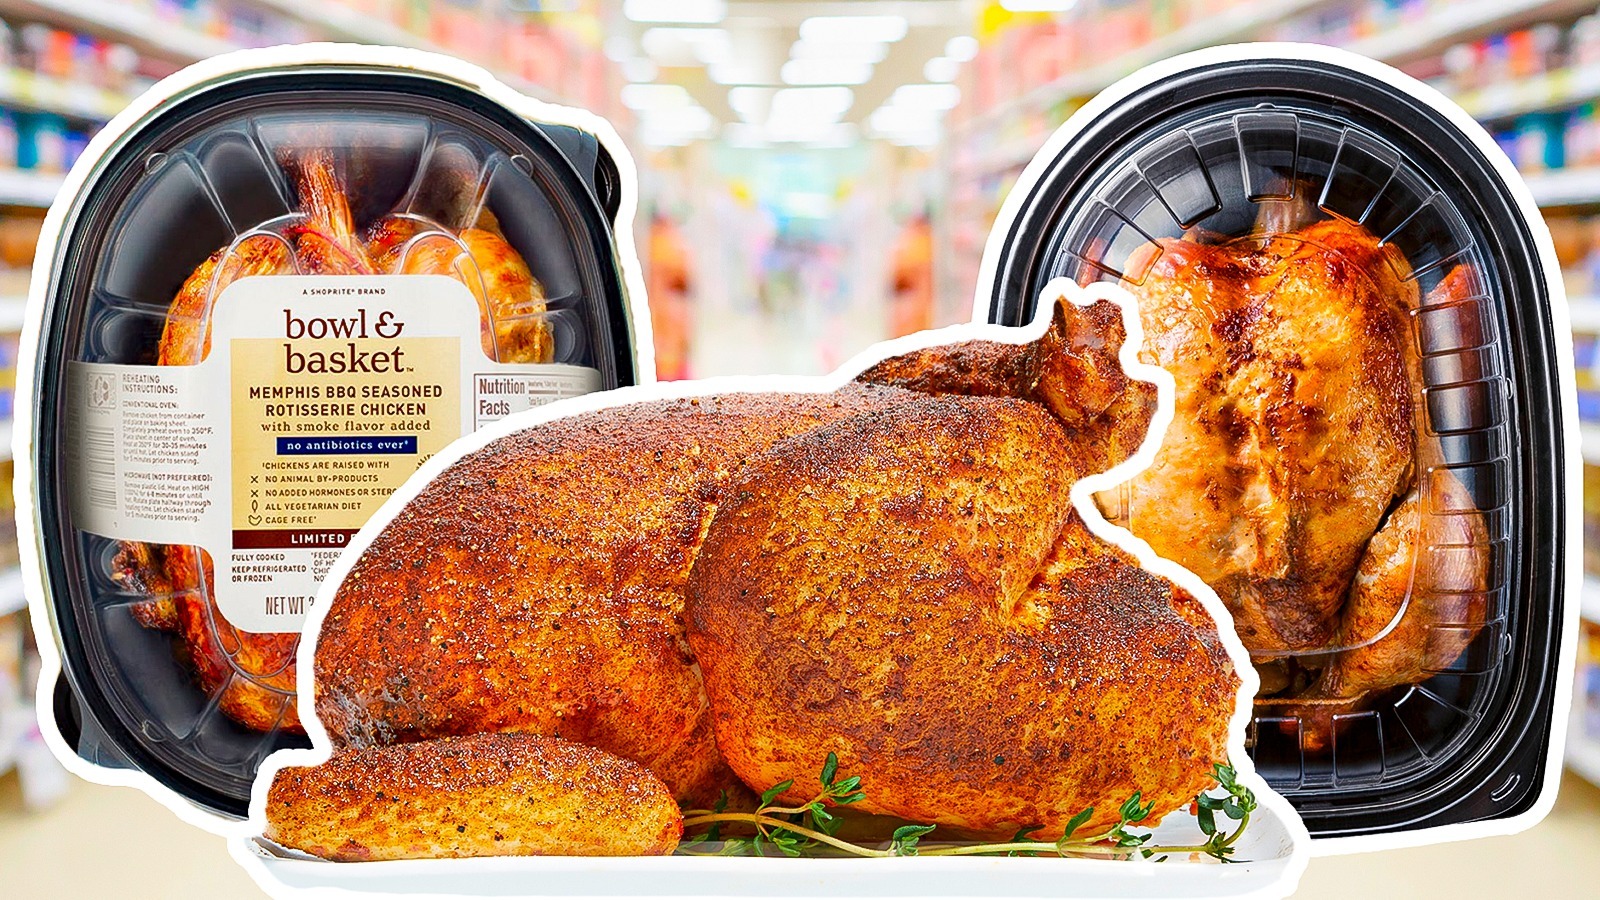 https://www.thedailymeal.com/img/gallery/the-12-best-grocery-store-rotisserie-chickens-ranked/l-intro-1686593895.jpg